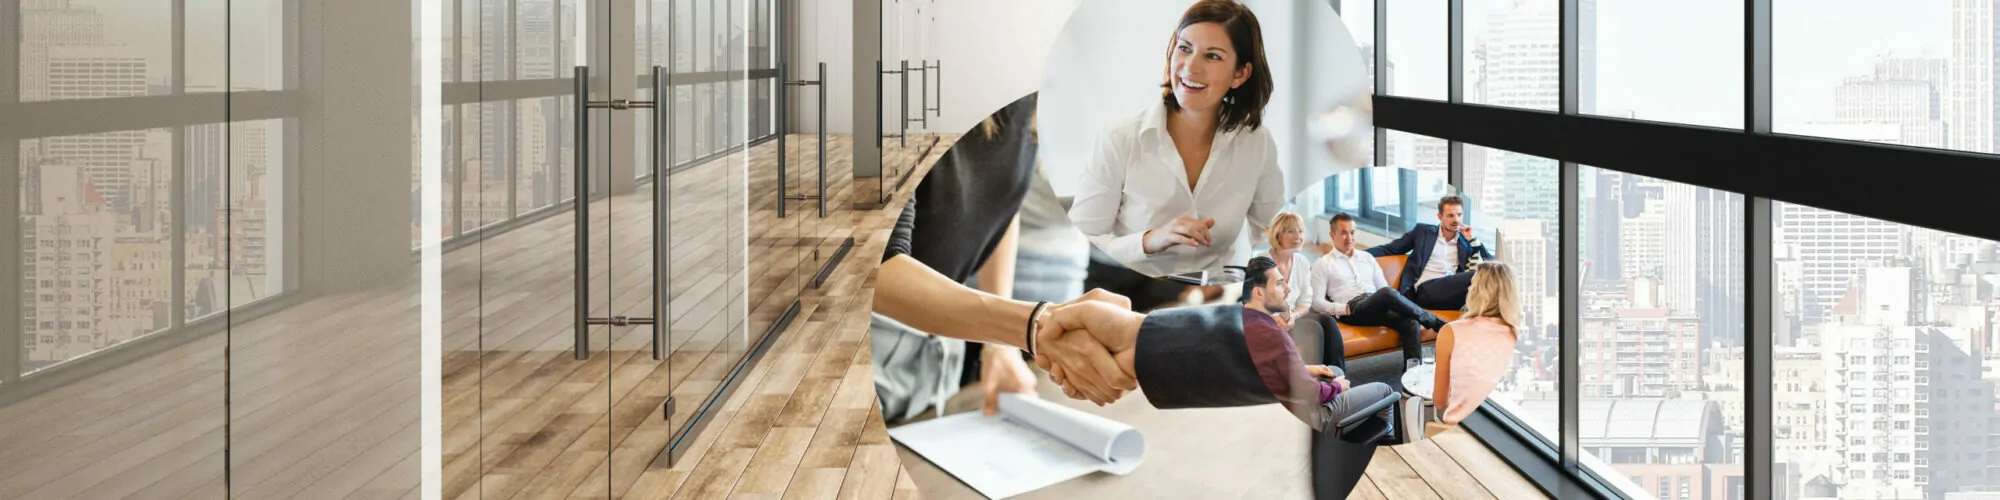 Image of a smiling woman and several colleagues in conversation, IT strategy consulting for HR